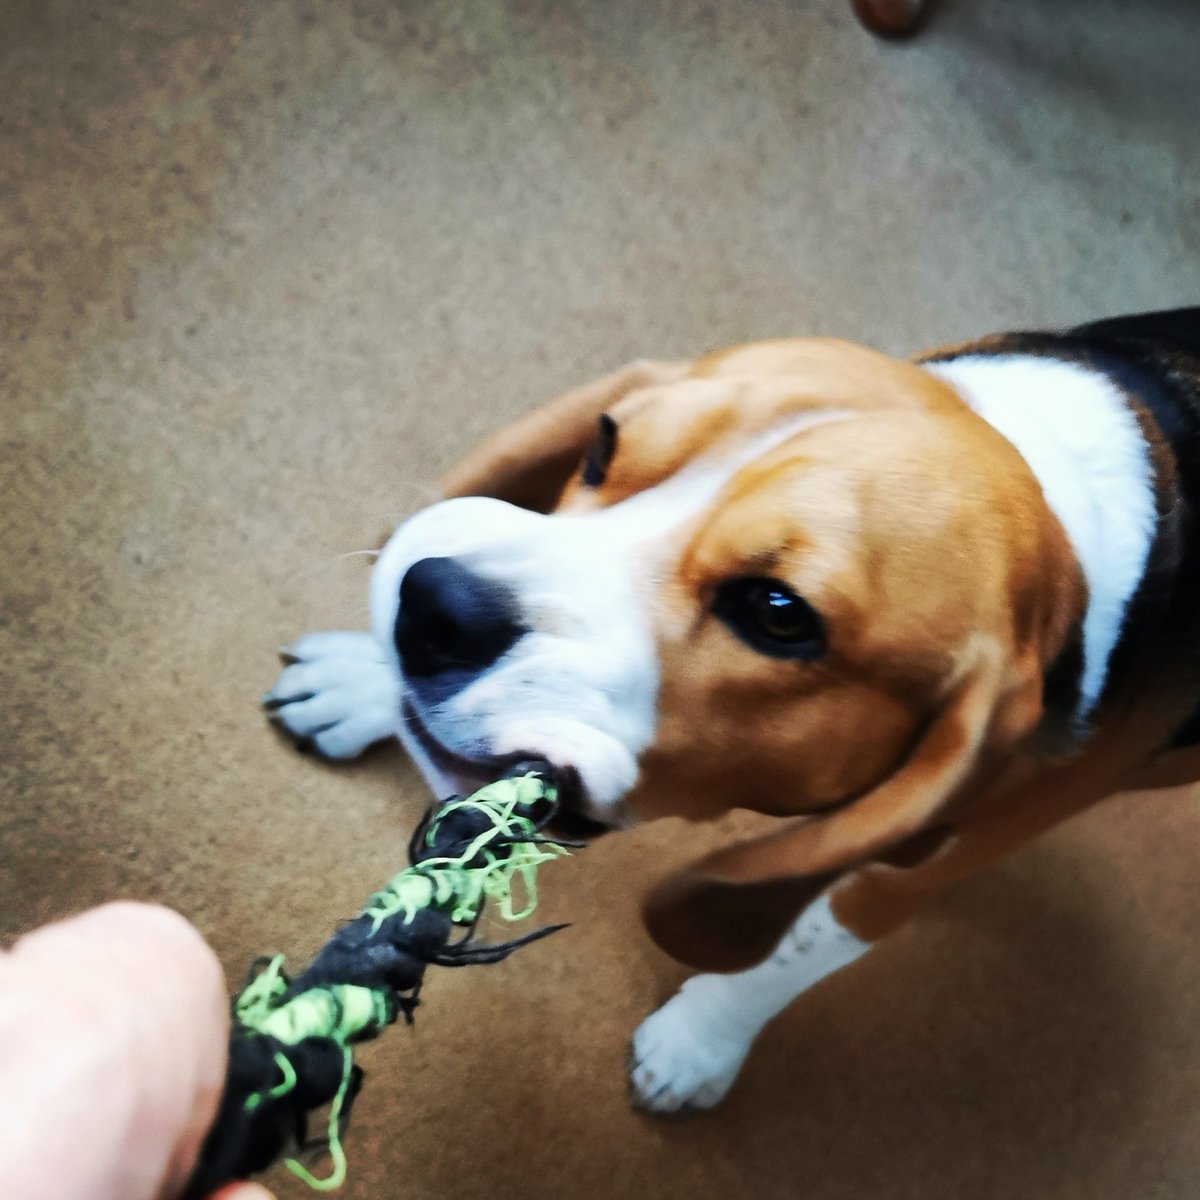 I win the rope toy!

#beagle #beaglepuppy #beaglesofglasgow #houndsofglasgow #hounddog #dogsofglasgow #monsterpups #biggestmonsterpup #playtime #dogstagram